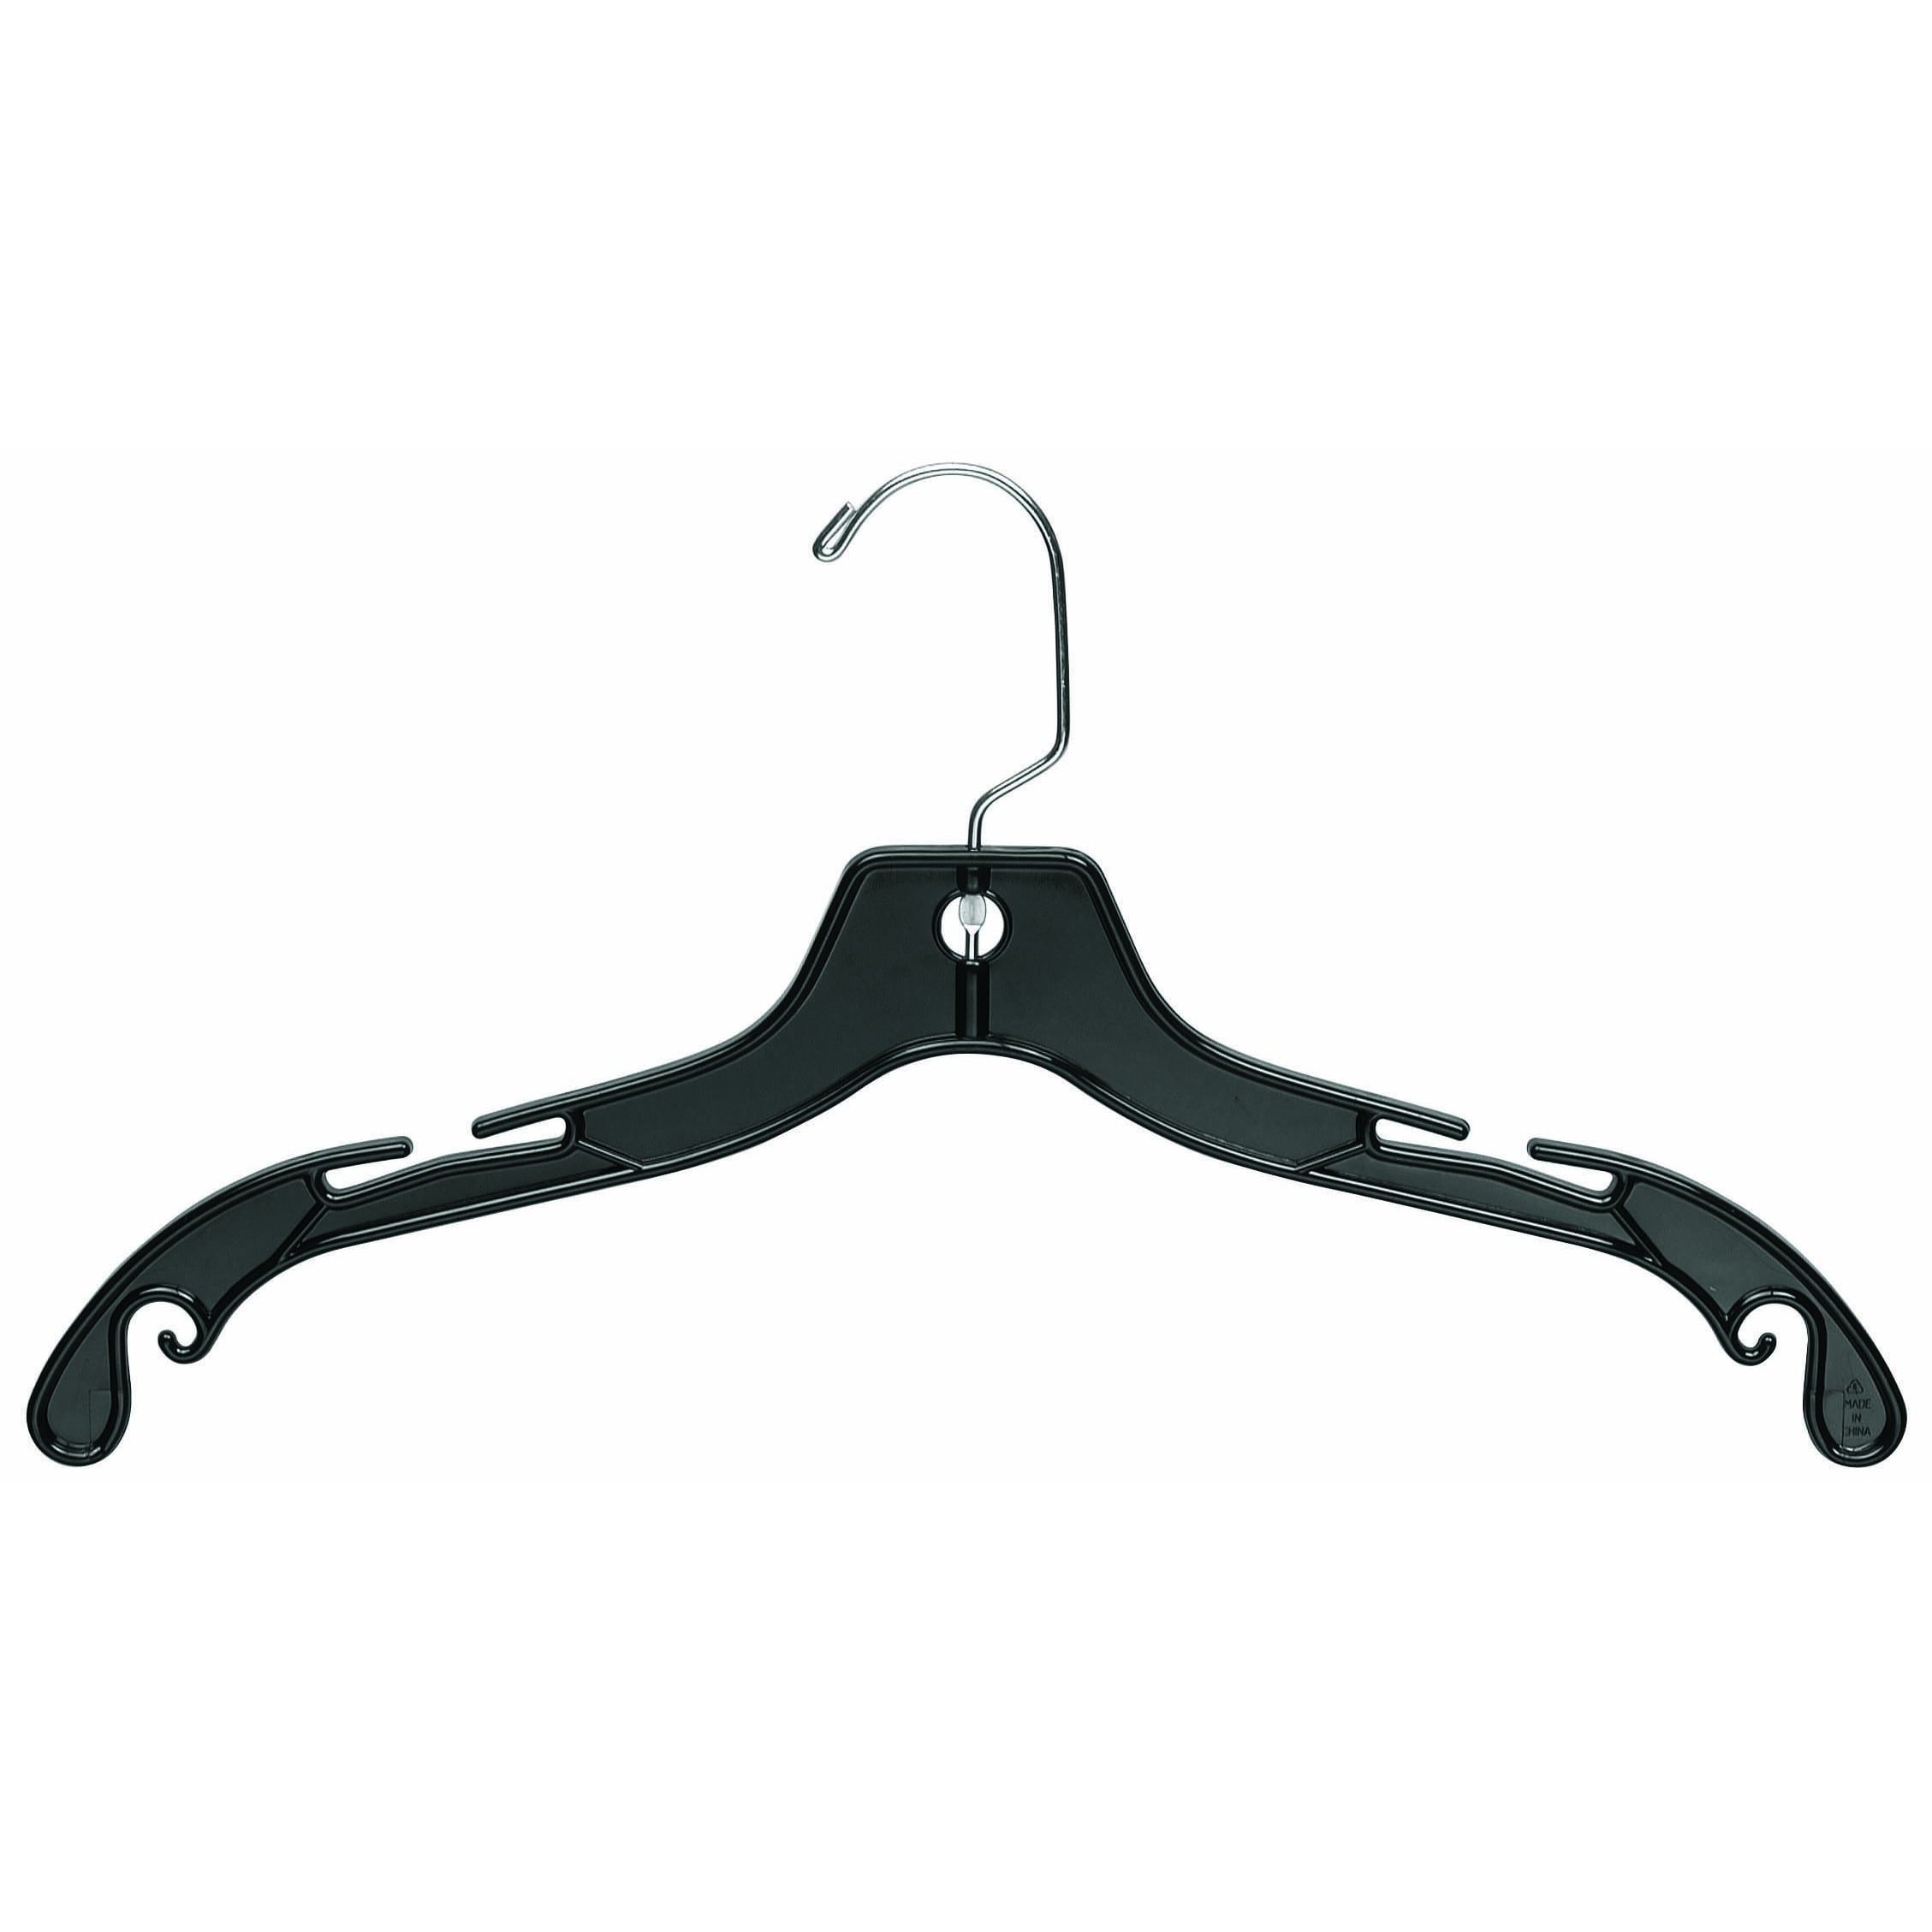 https://ak1.ostkcdn.com/images/products/9534922/Black-Plastic-Top-Hangers-Set-of-100-Strong-and-Affordable-Hangers-with-Chrome-Swivel-Hook-ece5a38d-8702-4c3b-b2ea-6d3c592d72df.jpg